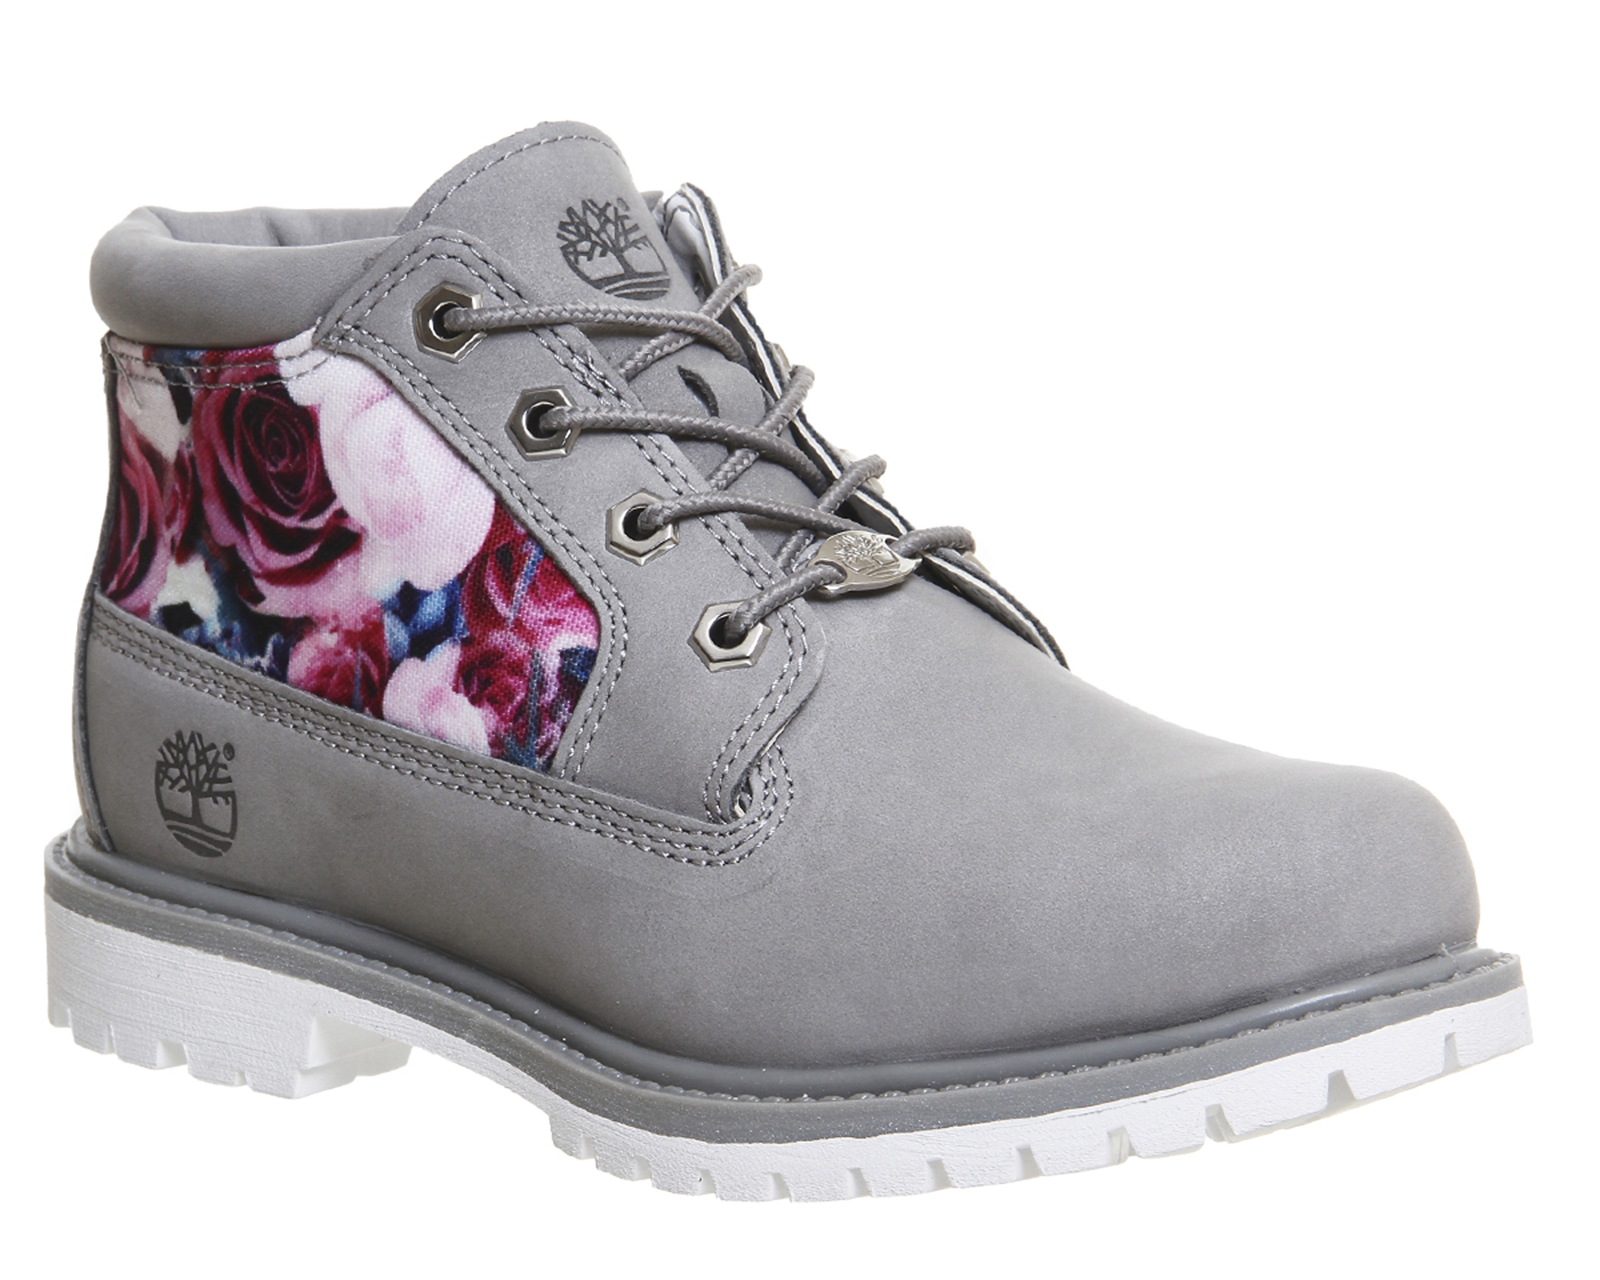 TimberlandNellie Chukka Double Waterproof BootsFloral Exclusive